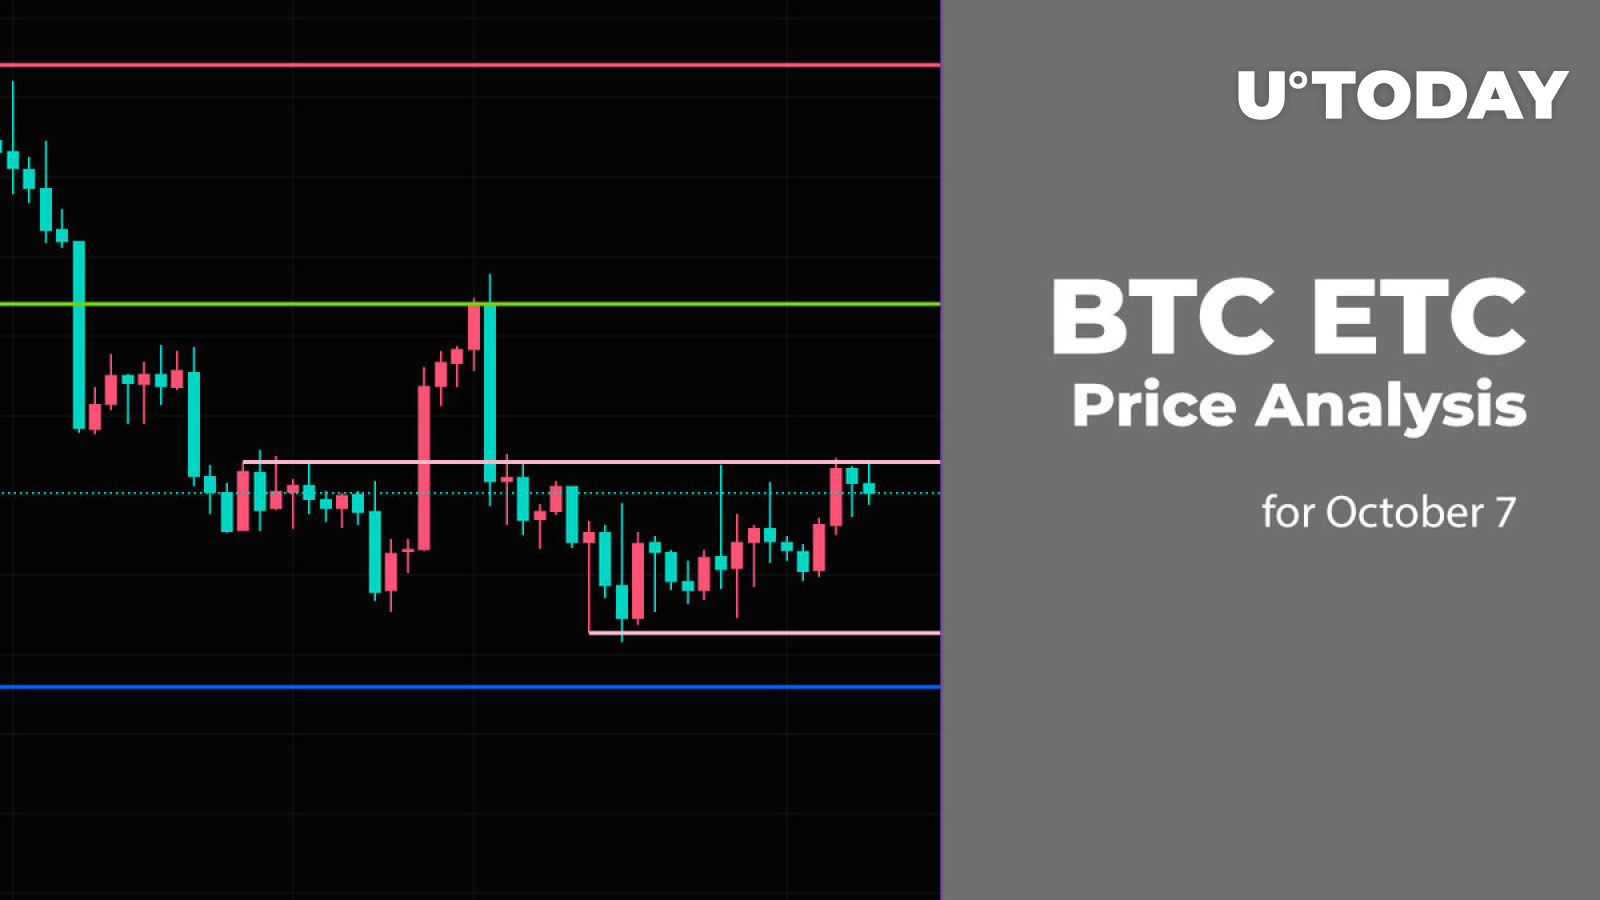 btc-and-etc-price-analysis-for-october-7